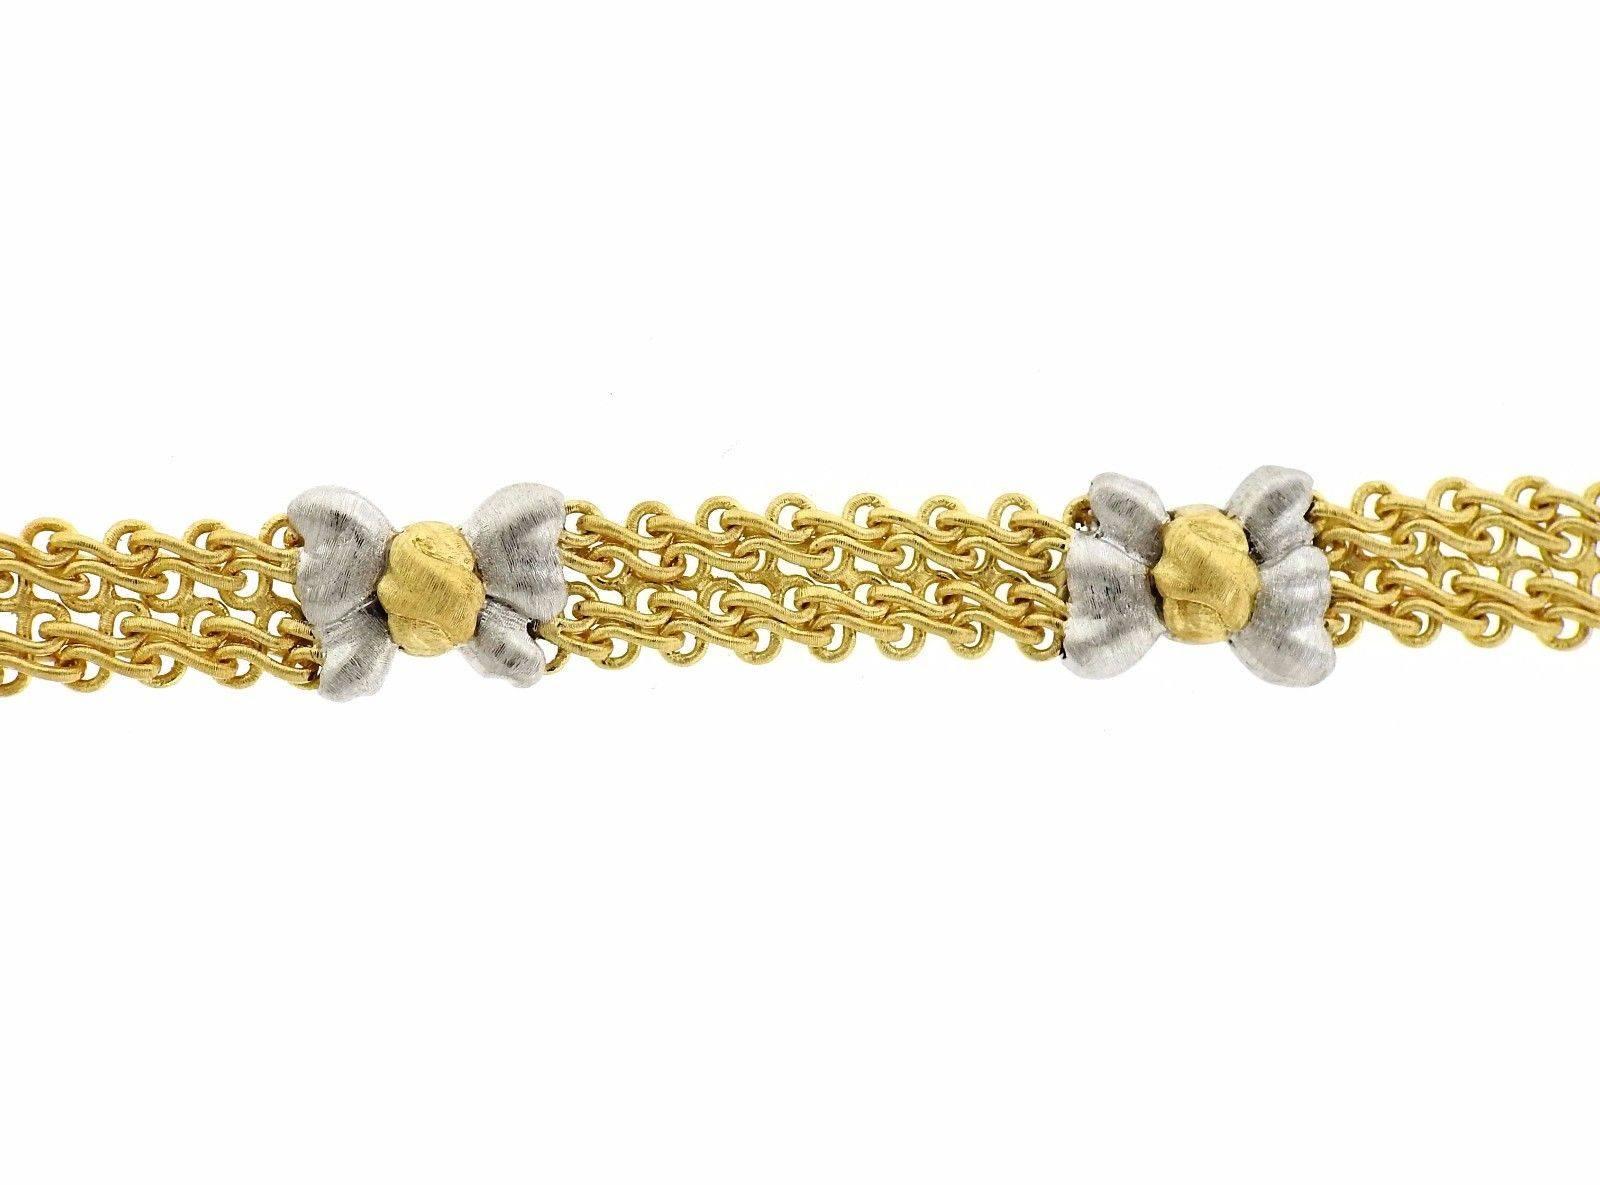 An 18k white and yellow gold bracelet by Buccellati.  The bracelet is 7